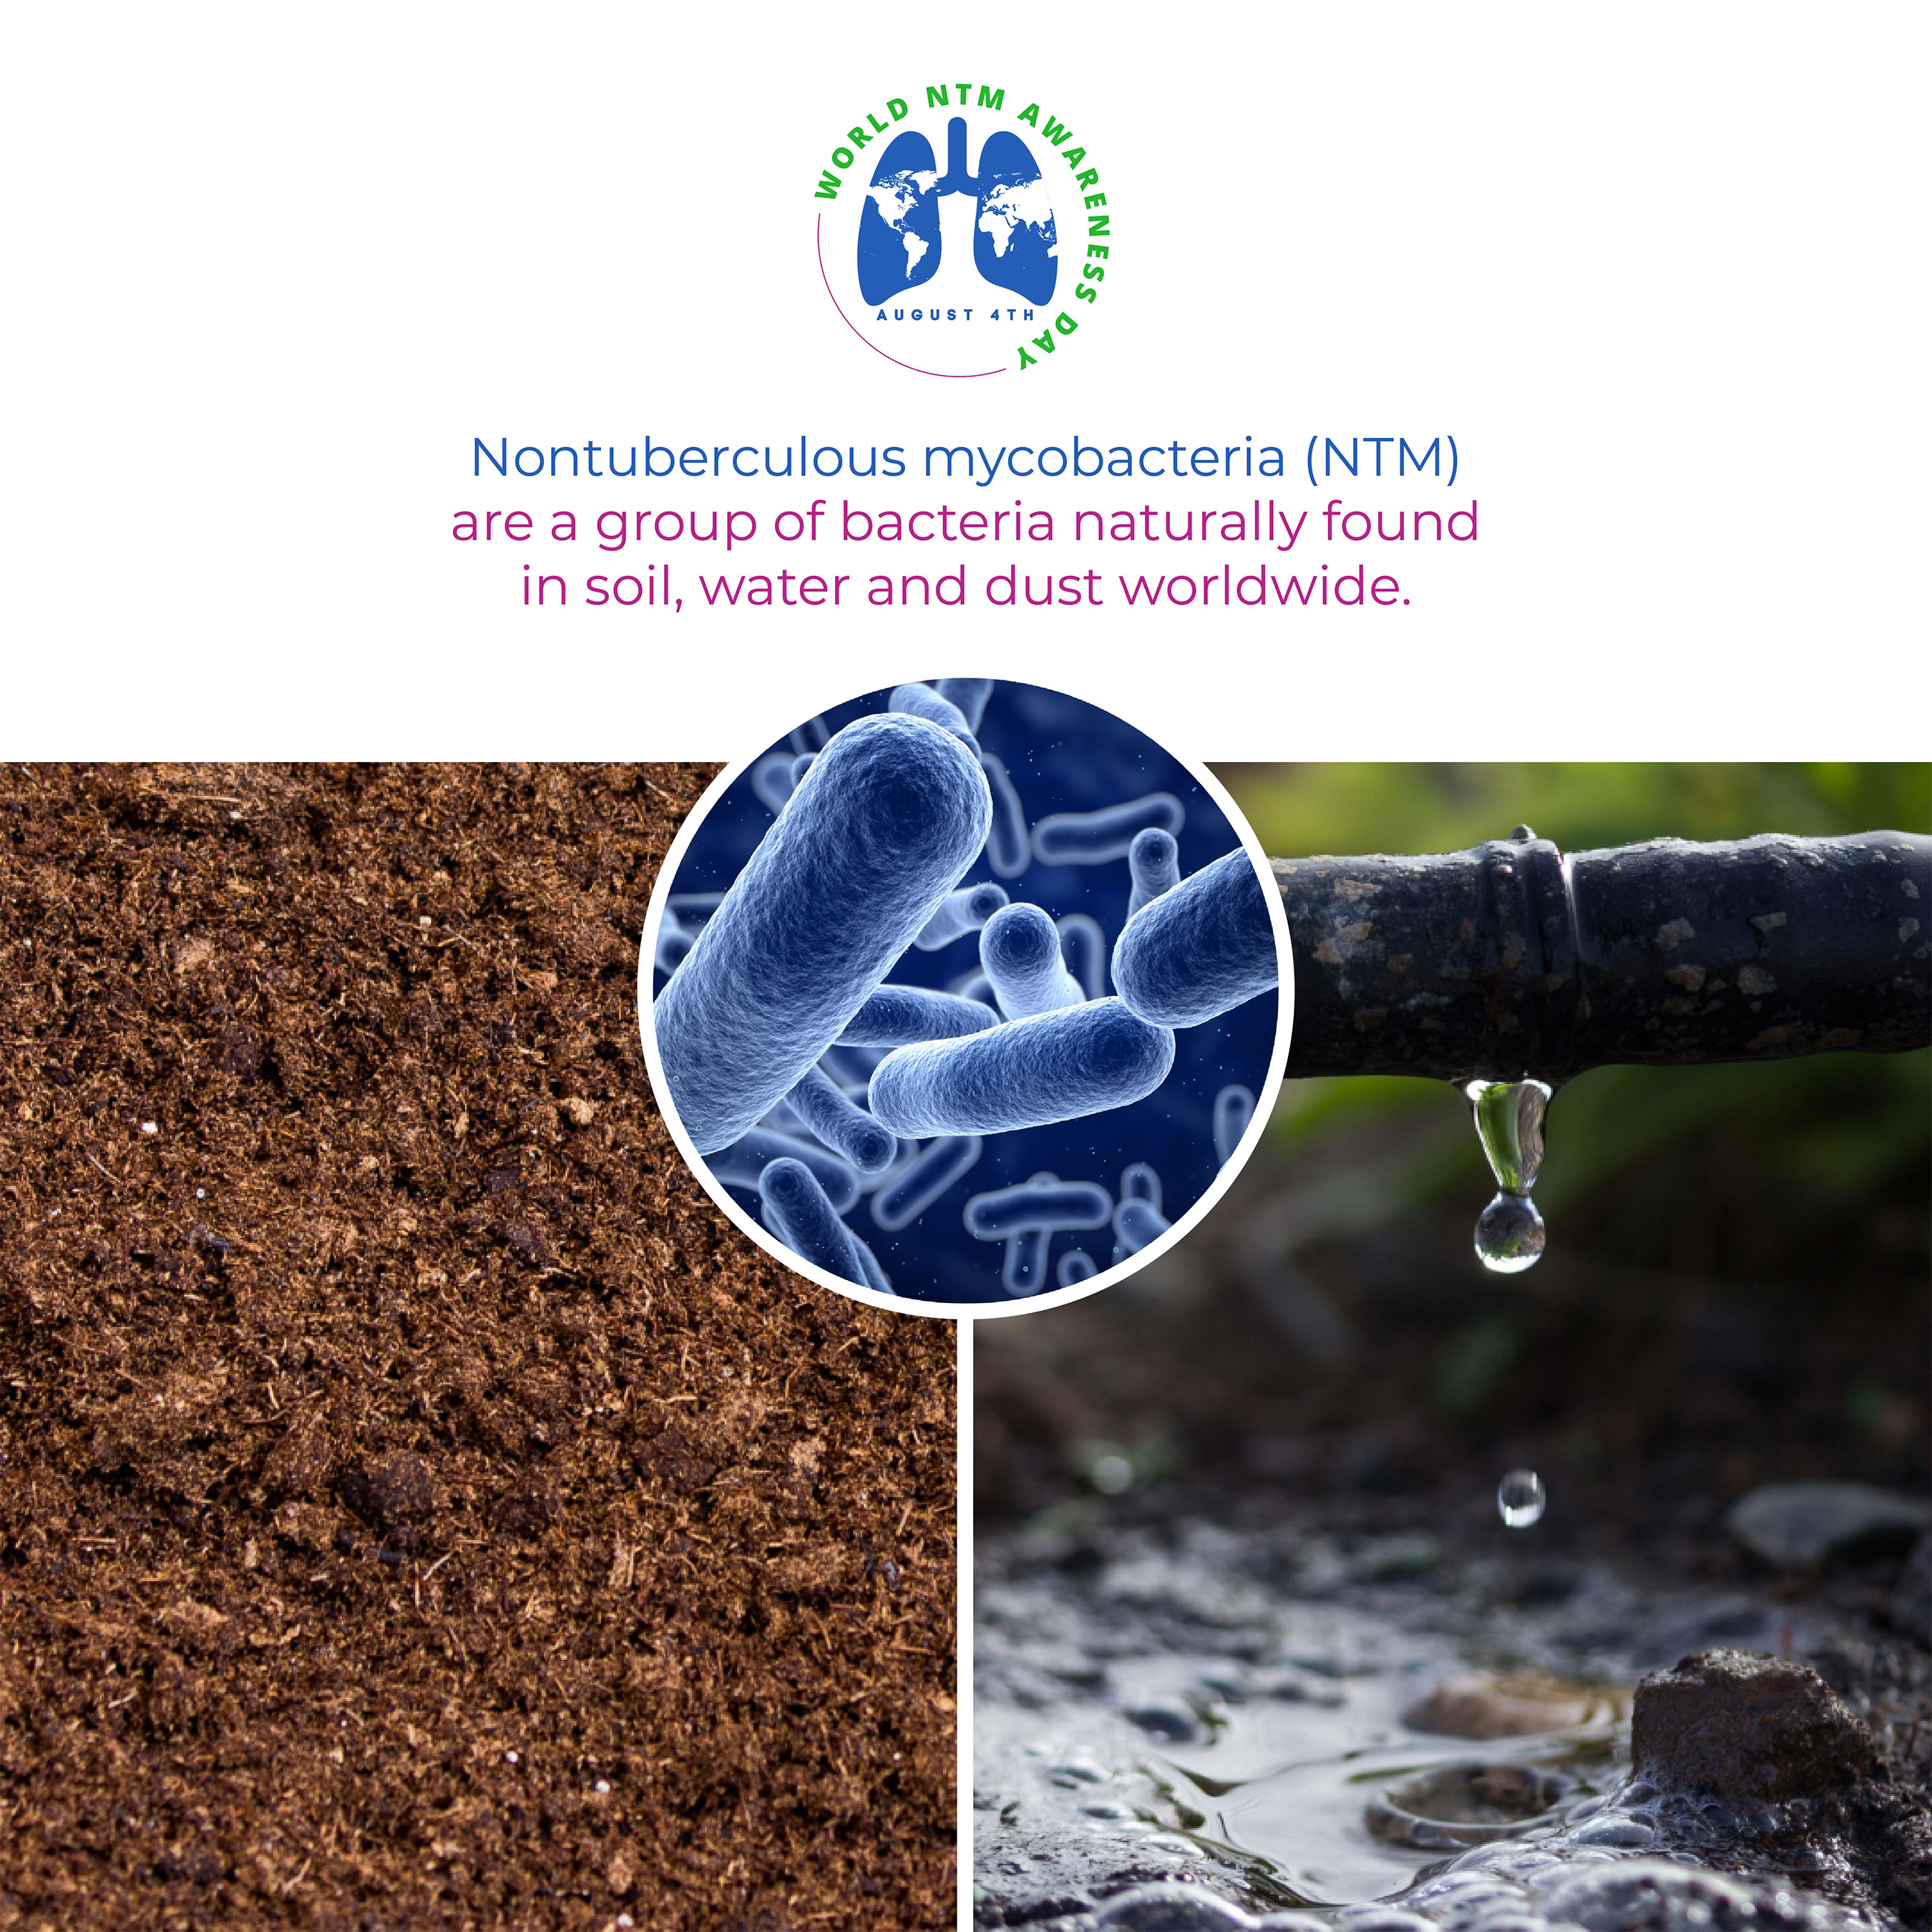 Join us in raising awareness about nontuberculous mycobacterial (NTM) infections and the impact they have on individuals worldwide. Did you know NTM organisms are in the environment, including water & soil? Together, let's work towards early detection, improved treatment options, and better support for those affected. Visit https://worldntmday.org for more info on NTM lung disease #NTMAwareness #NTMAwareness #FightNTM #worldntmday